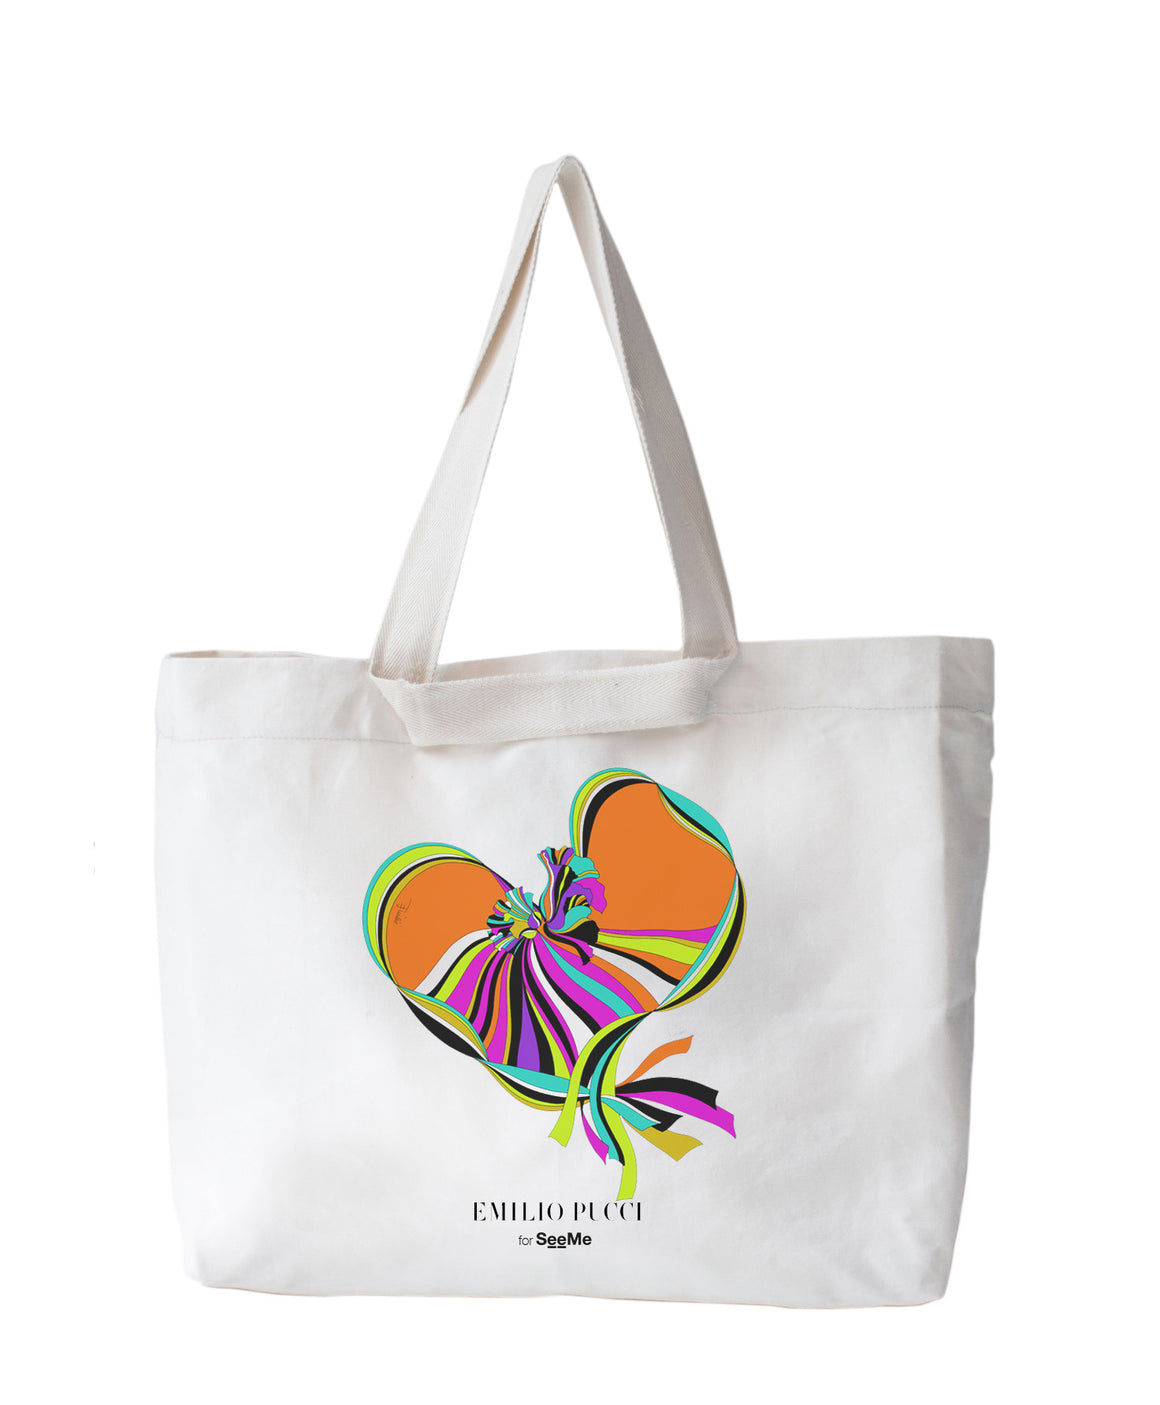 Tote by Emilio Pucci for SeeMe